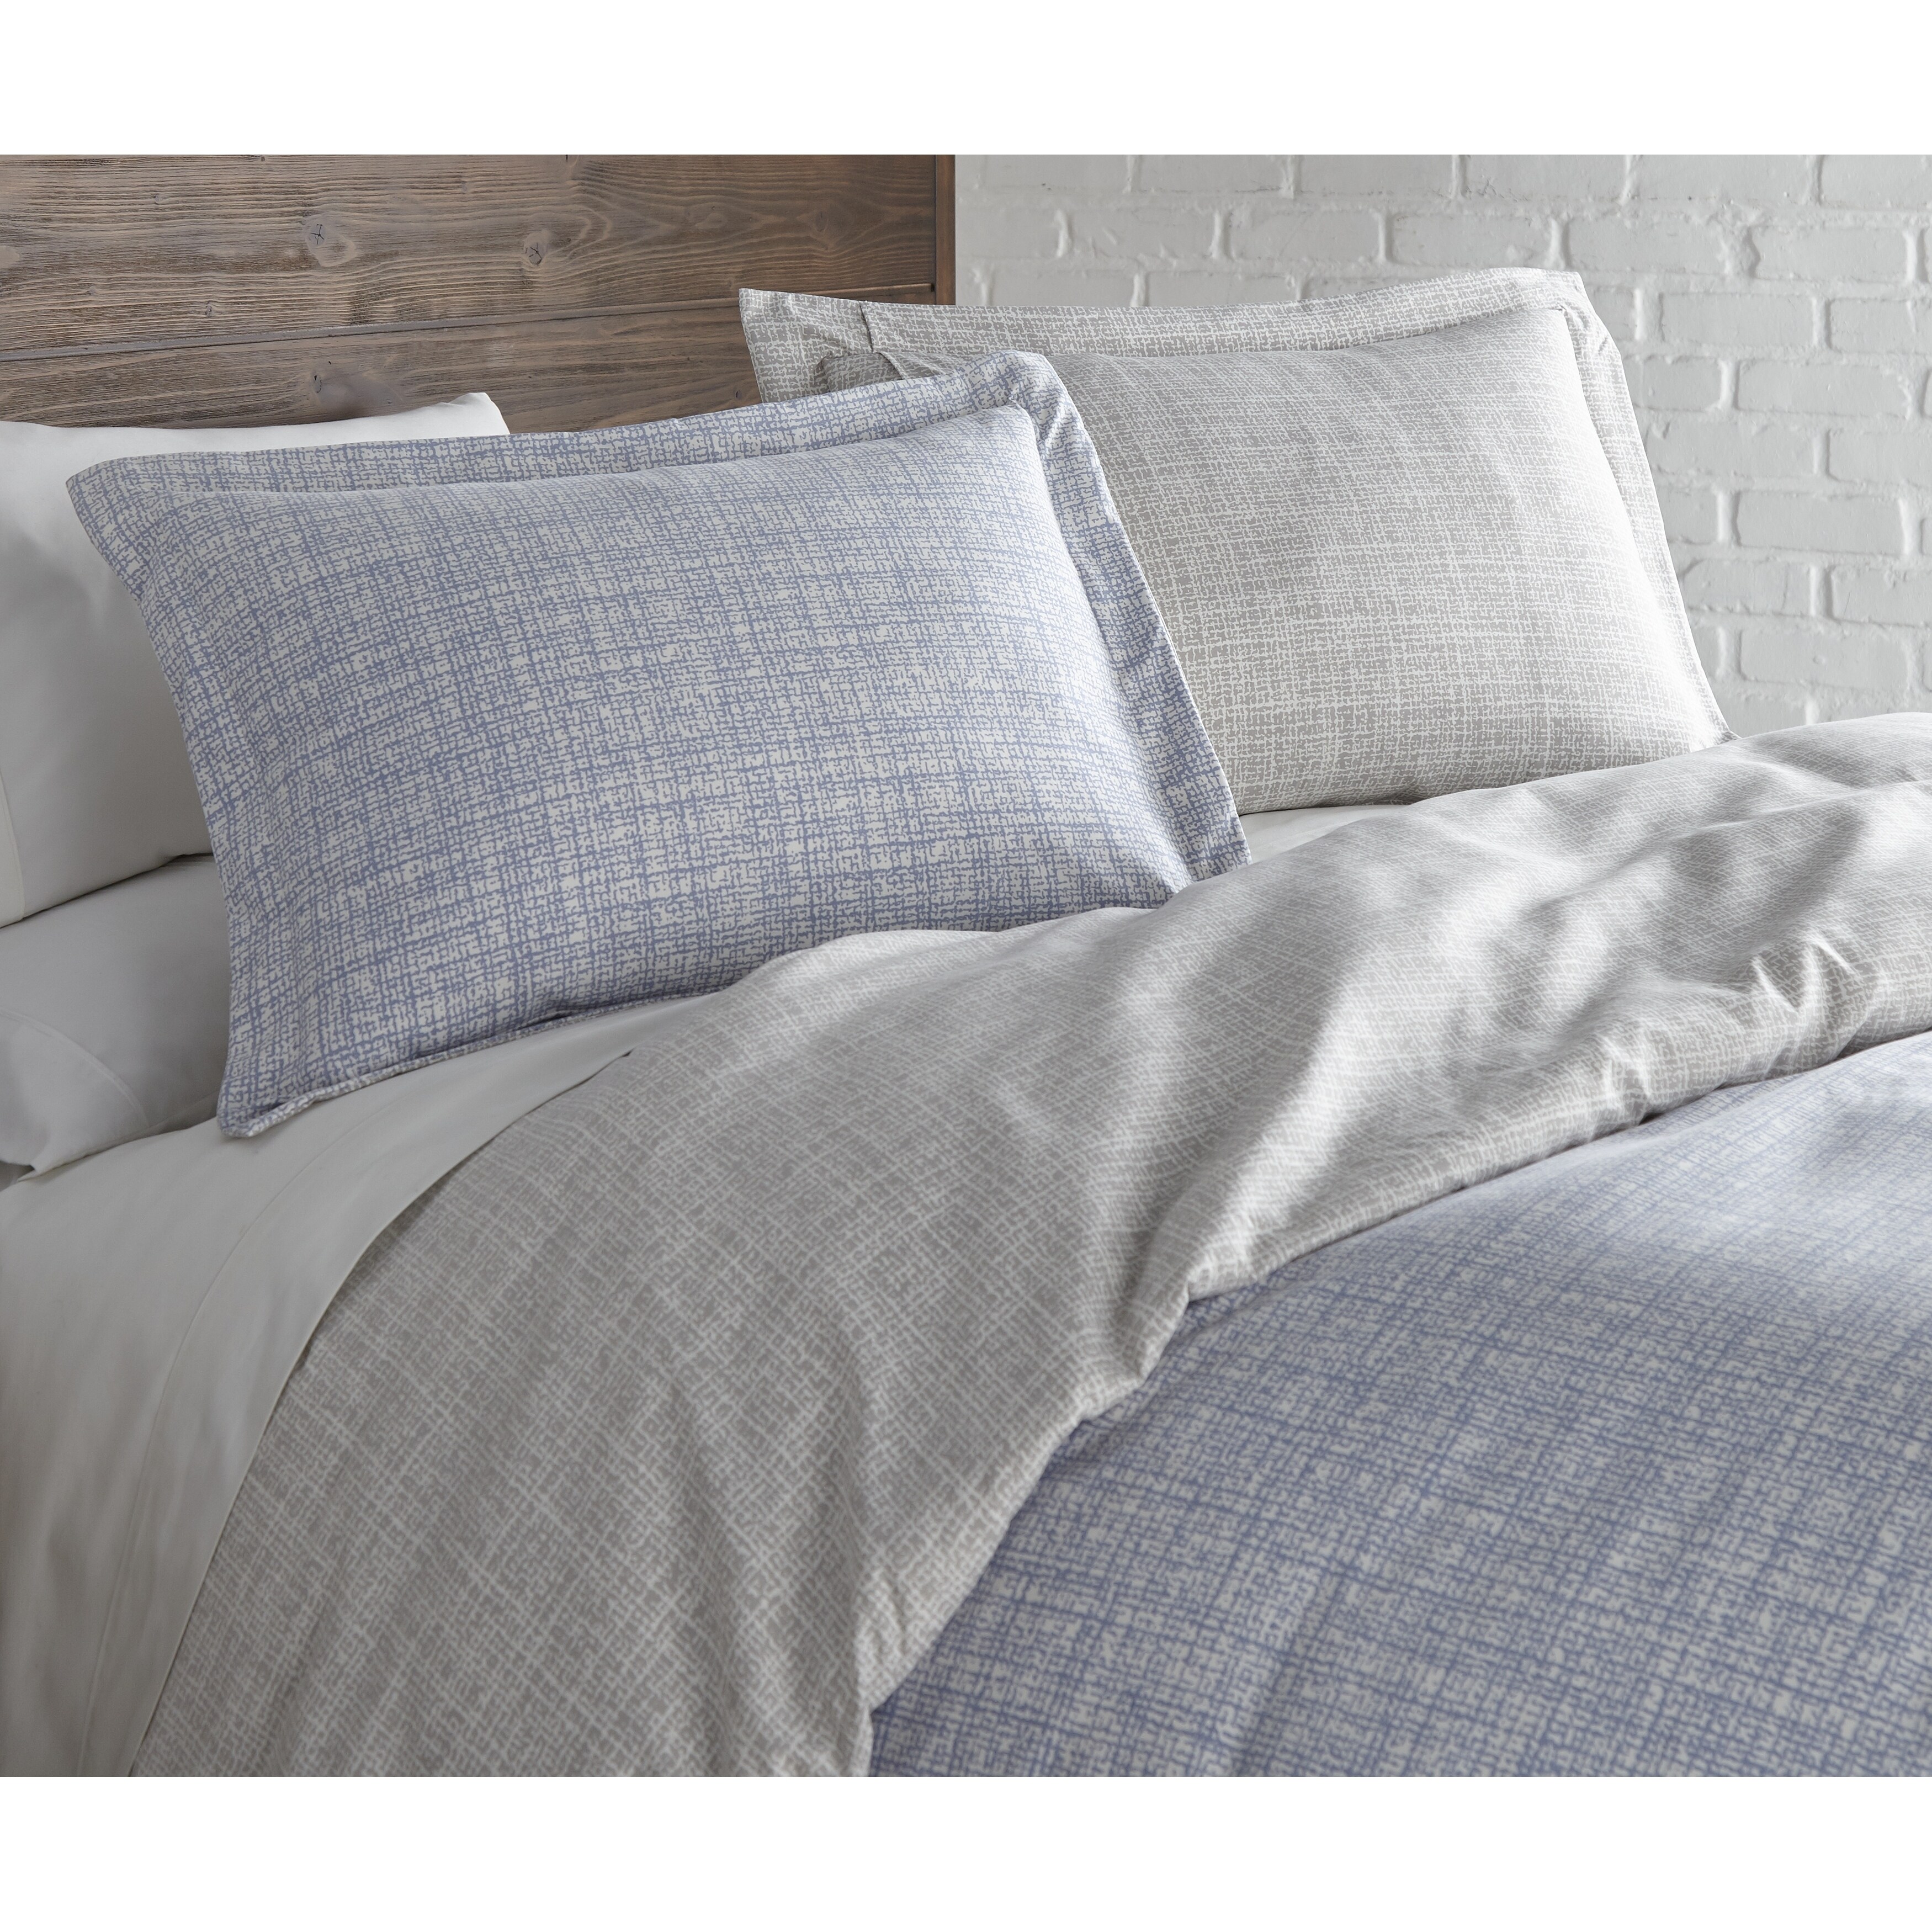 Shop Vilano Choice Premium Ultra Soft Muted Mesh Duvet Cover And